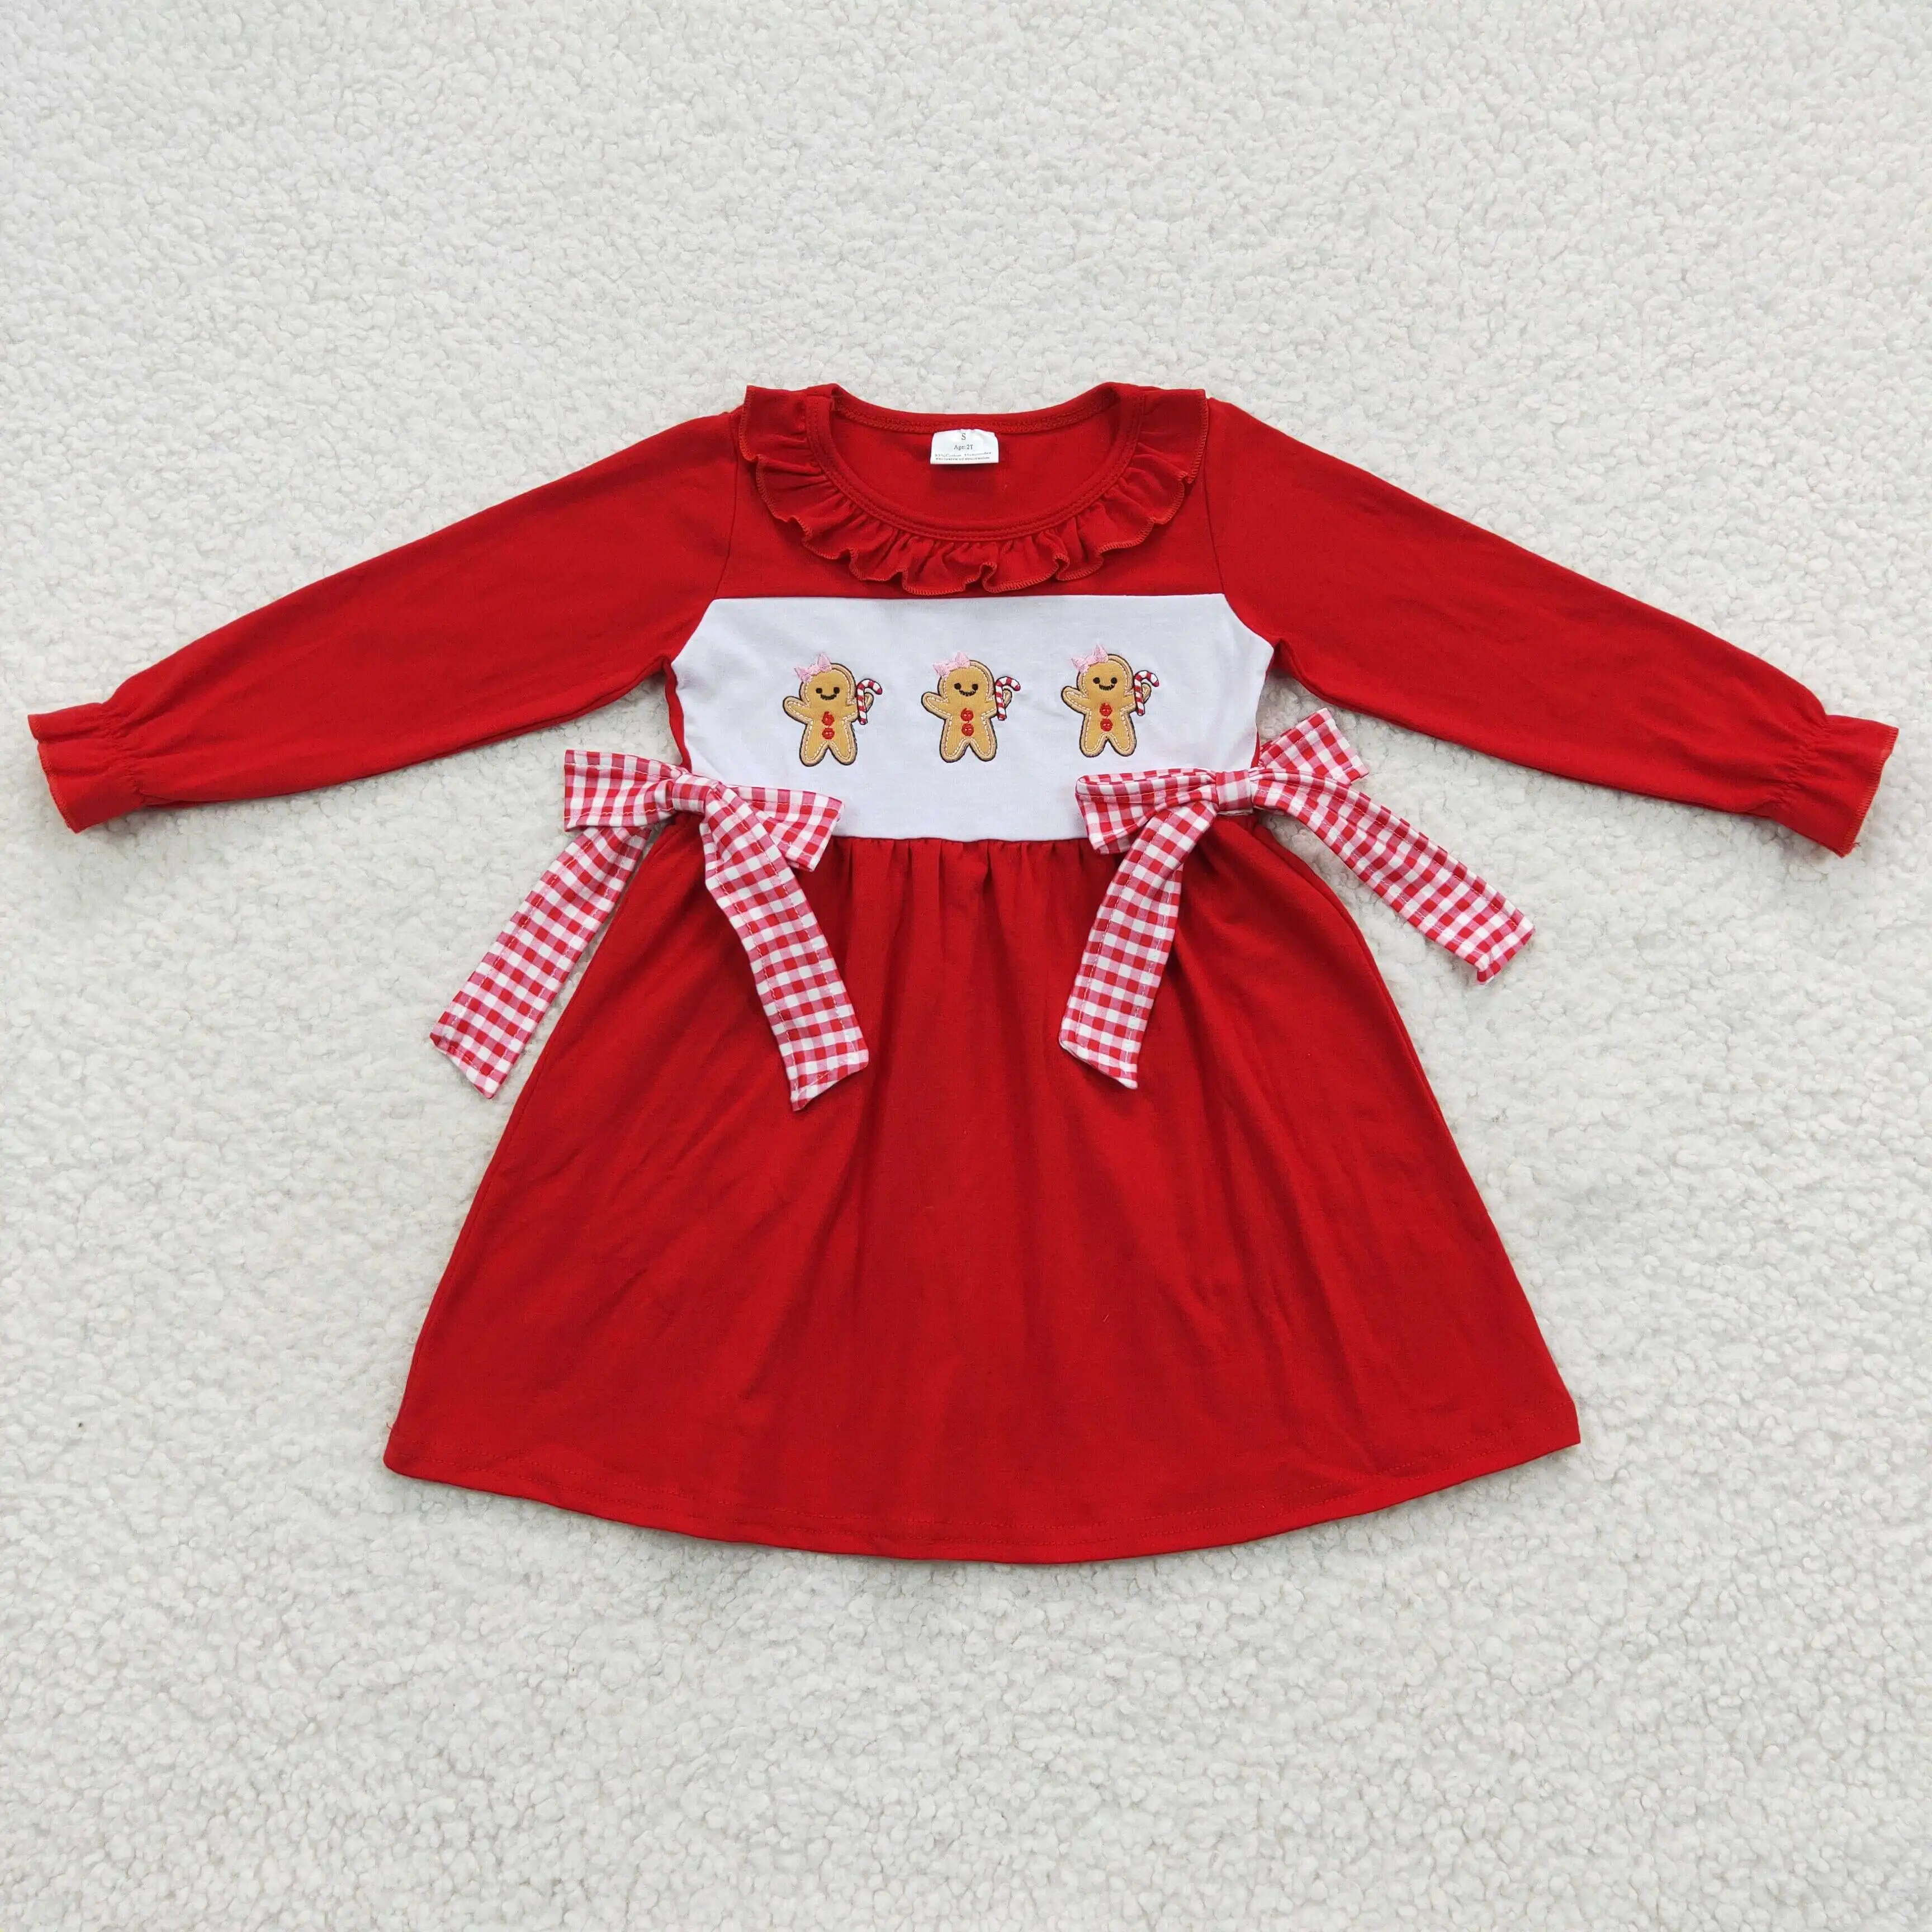 Wholesale Kids Baby Fashion Girl Red Christmas Gingerbread Man Boutique Pattern Embroidery Long Sleeve Dress Made Milk Silk